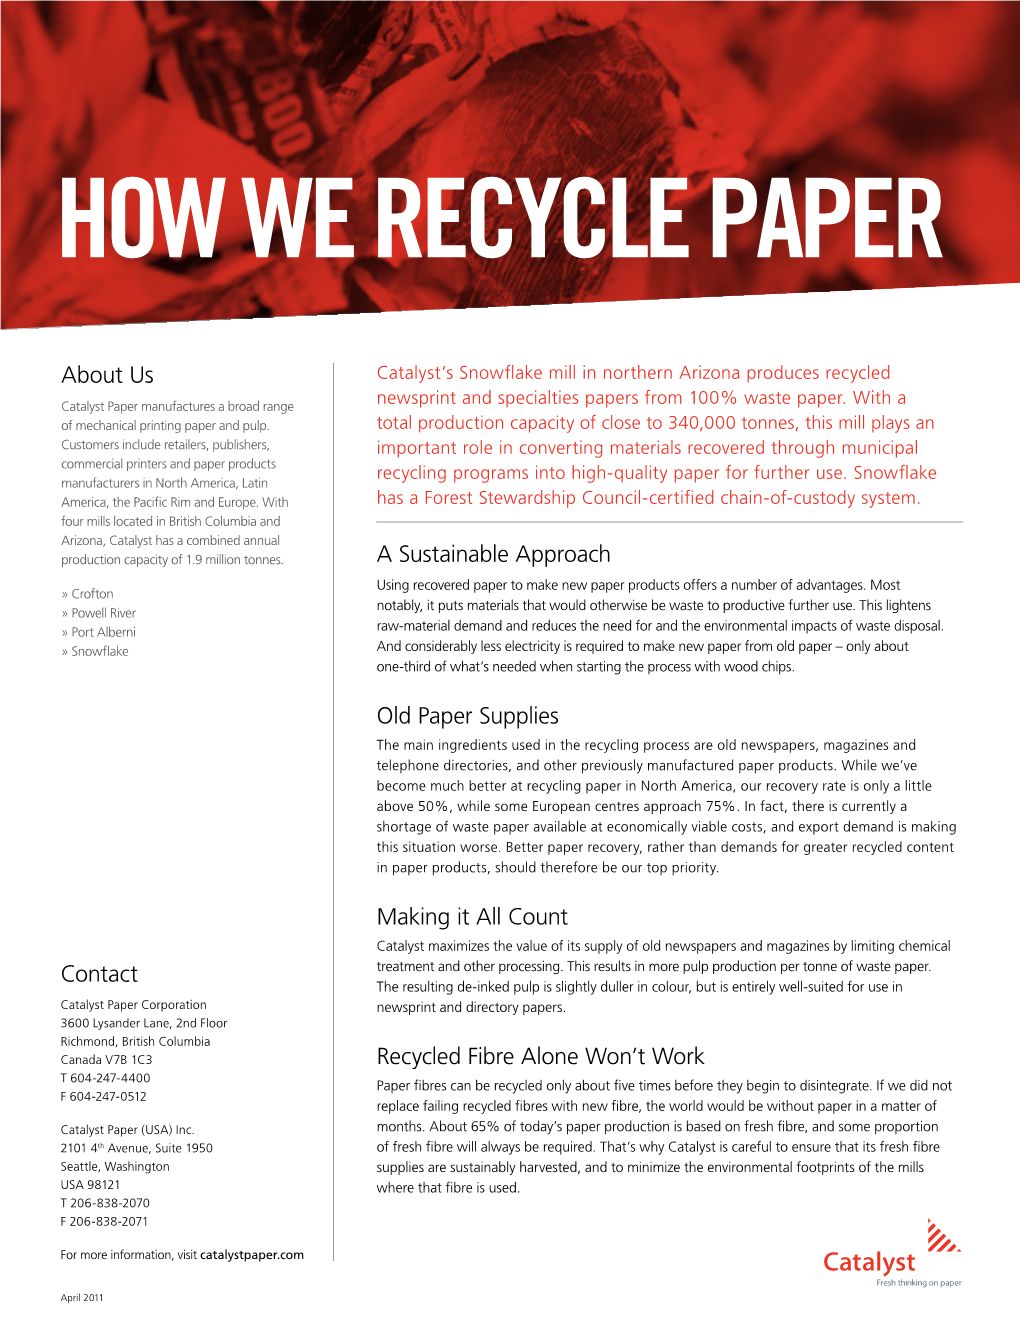 How We Recycle Paper